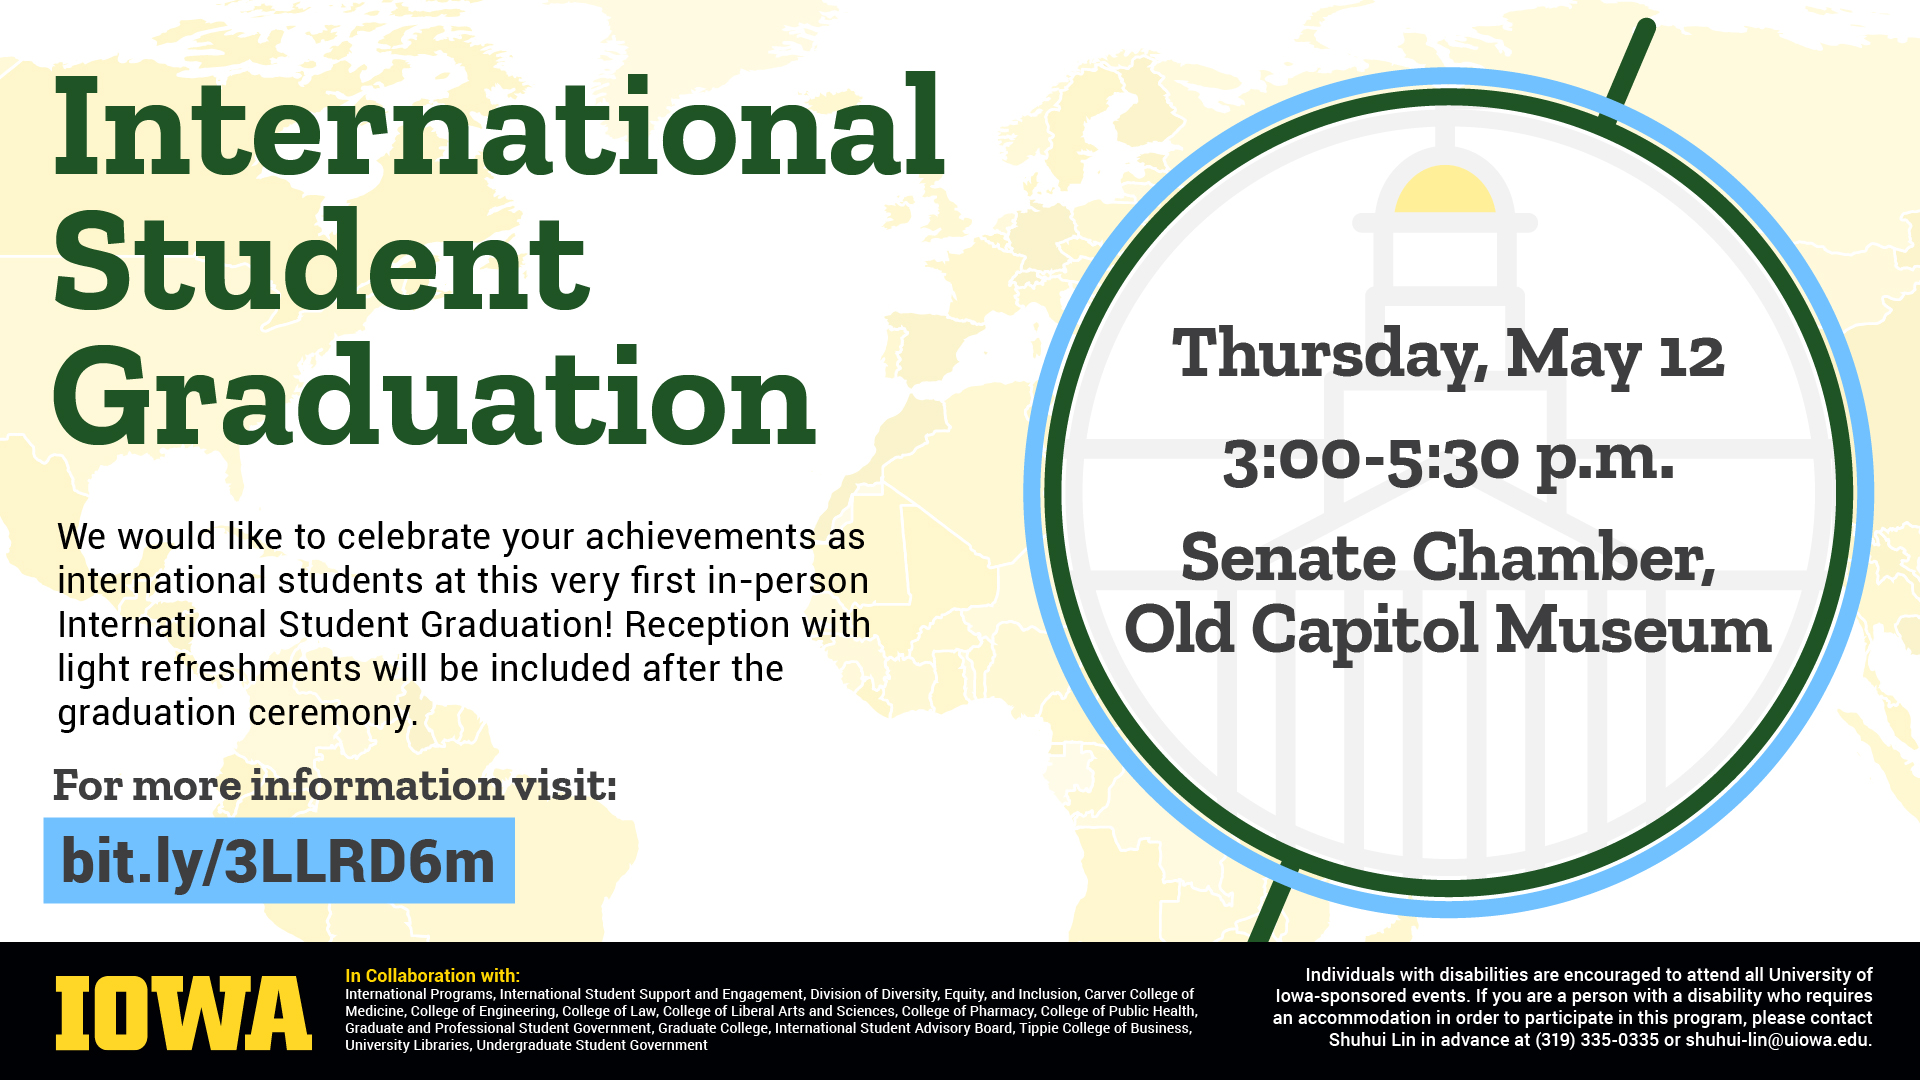 International Student Graduation, Thursday, May 12 3:00-5:30 o.m. Senate Chamber, Old Capitol Museum. For more information, visit bit.ly/3LLRD6m